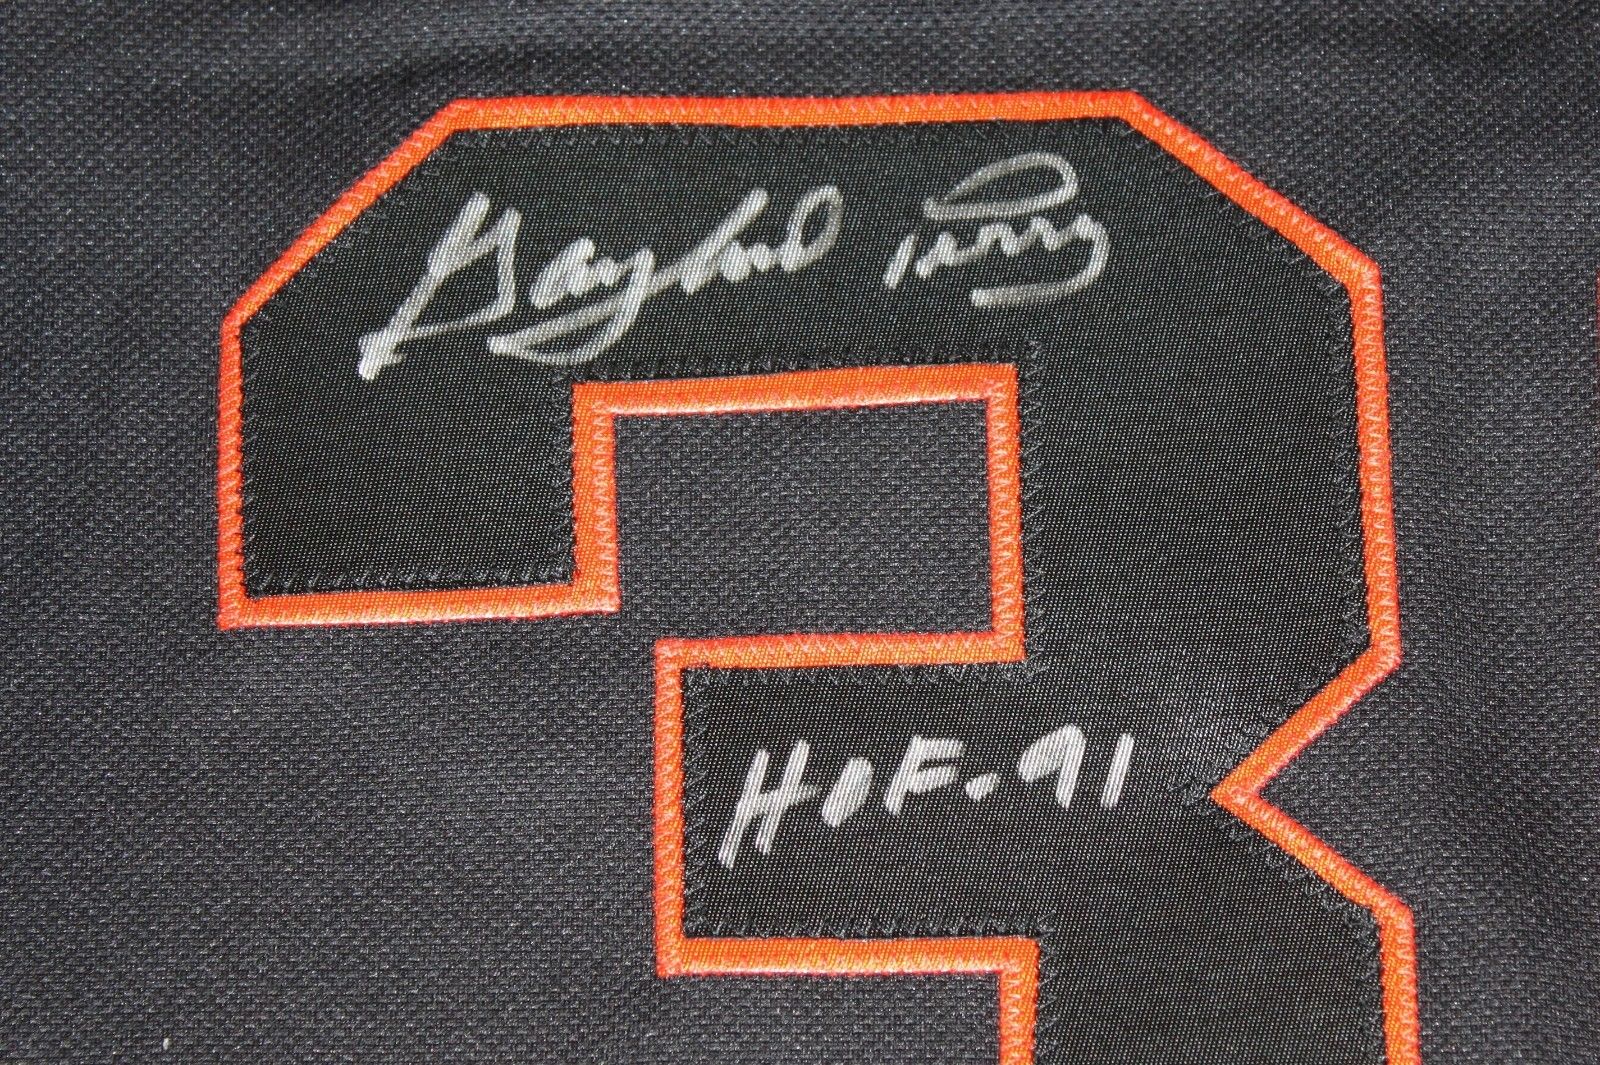 Gaylord Perry Autographed Black San Francisco Giants Jersey W/ HOF